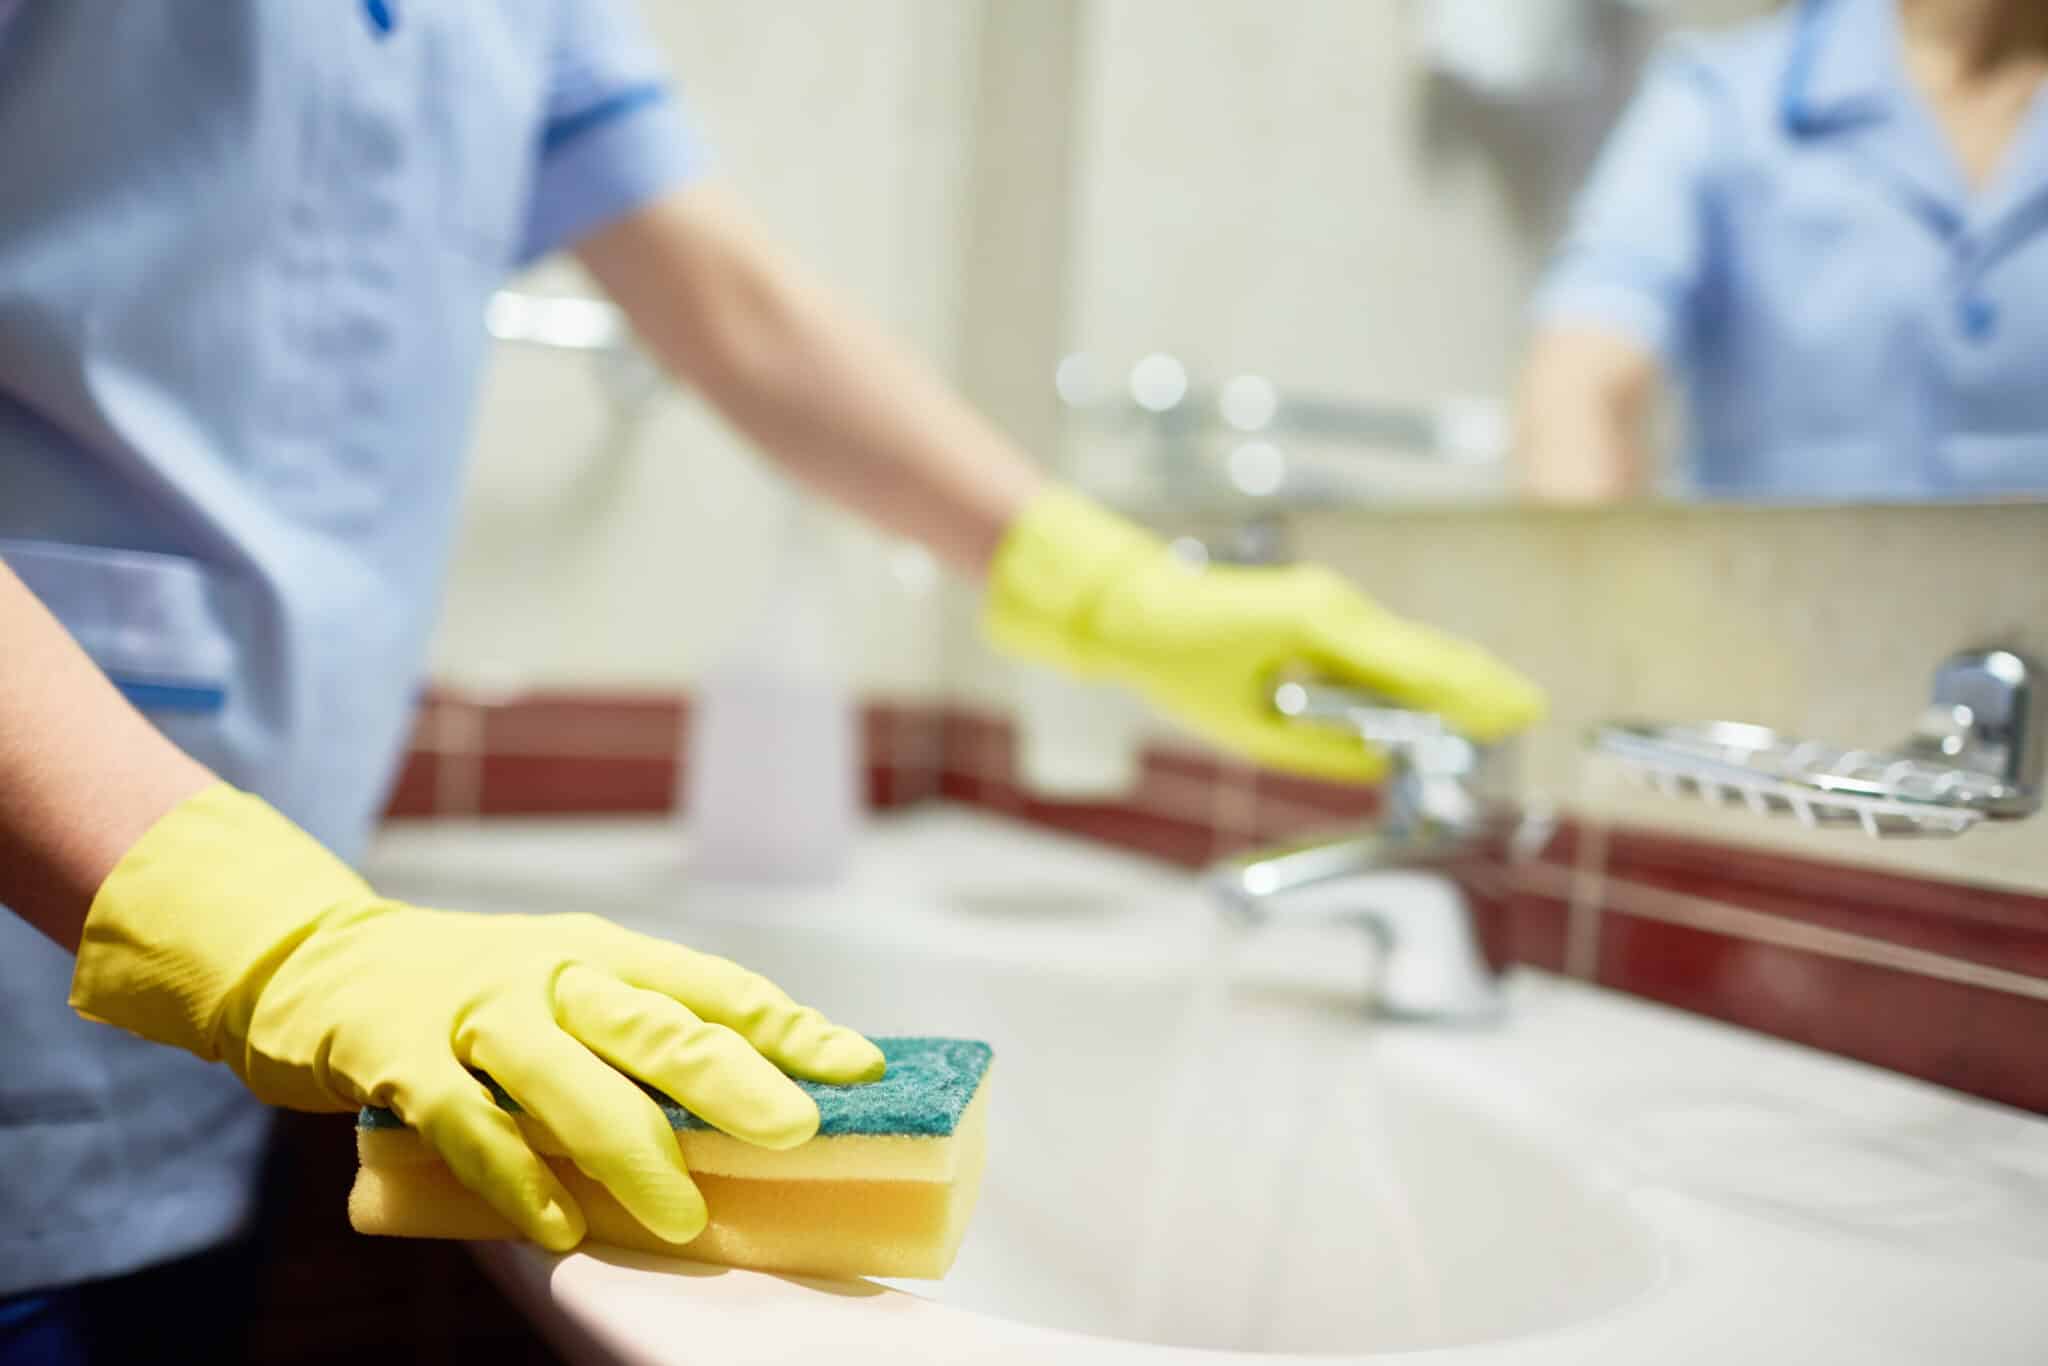 How Do You Clean and Disinfect a Drain